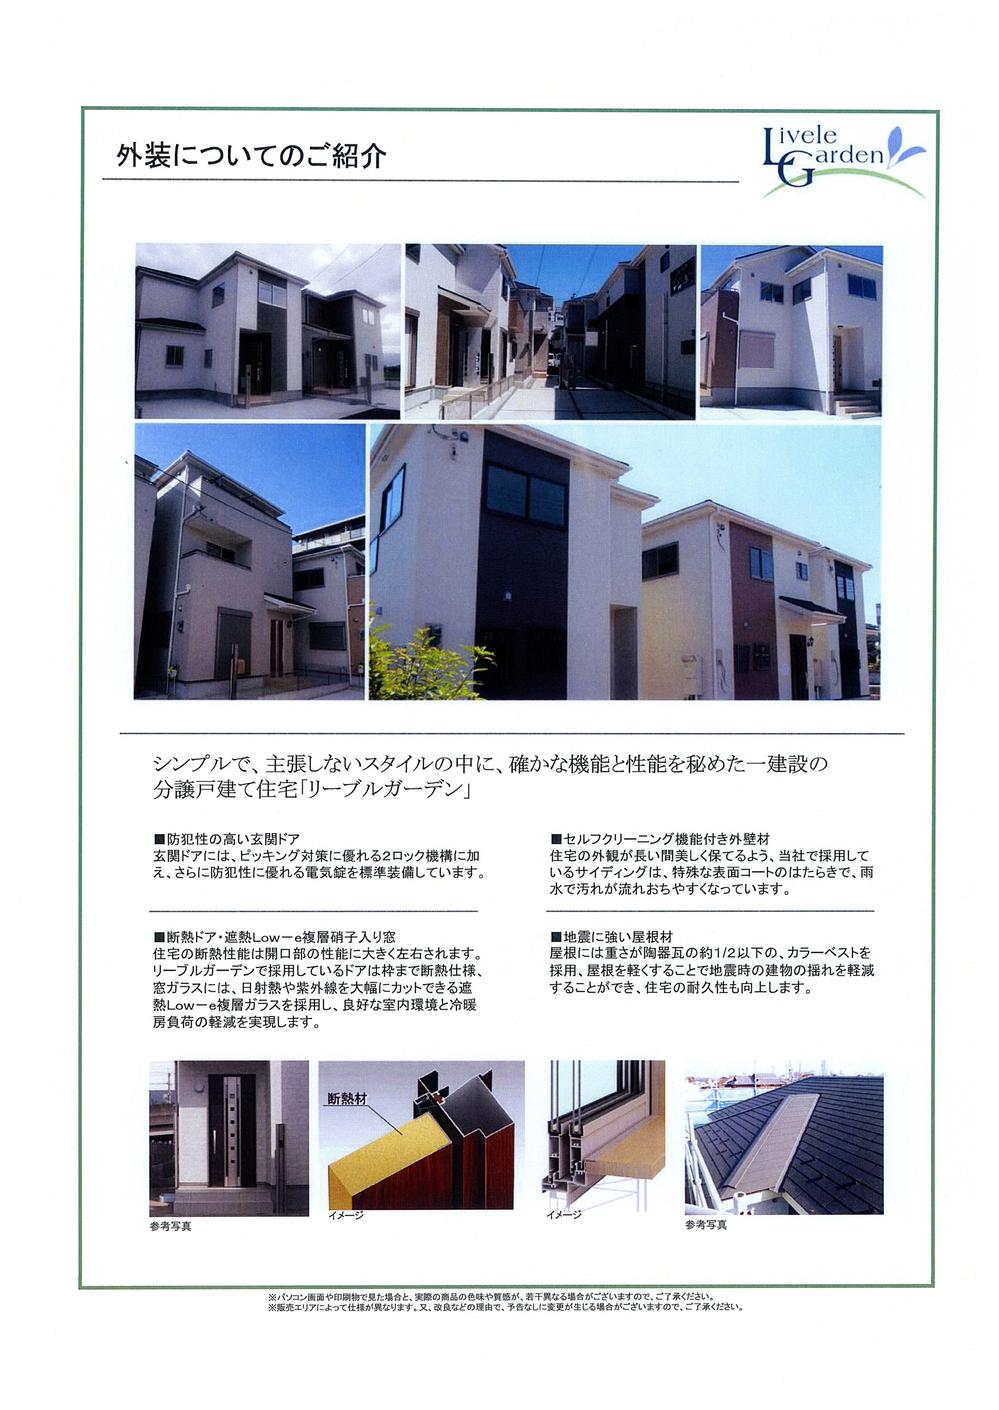 Construction ・ Construction method ・ specification. Libre Garden series with hidden certain features and performance in a style that does not insist on simple